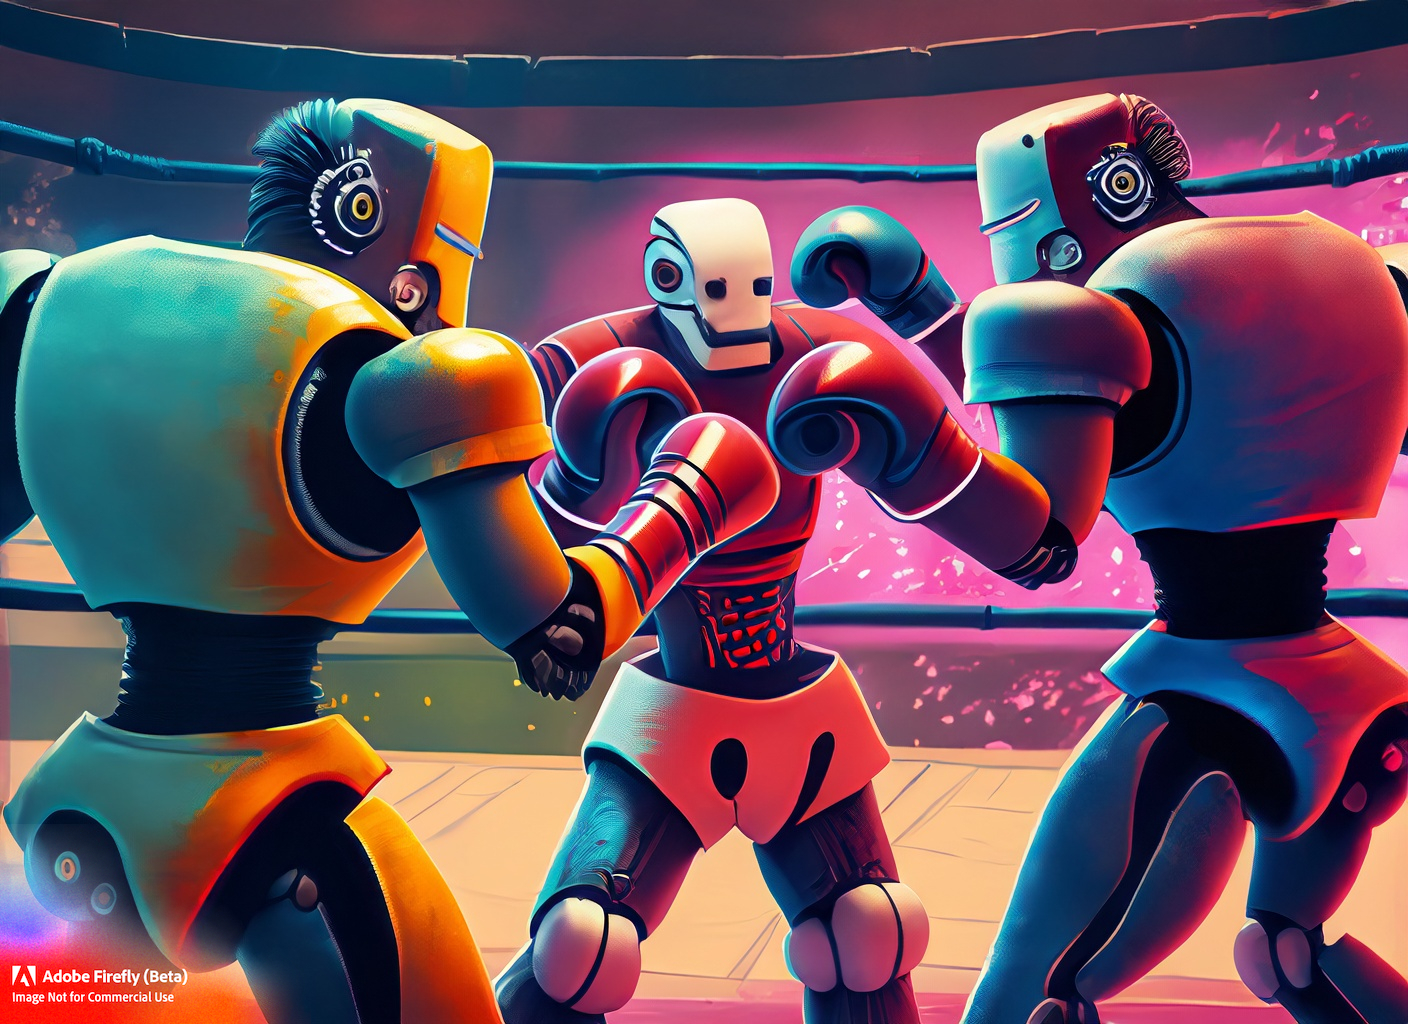 Adobe AI Firefly Image of 3 robots fighting each other in a boxing ring, vibrant color